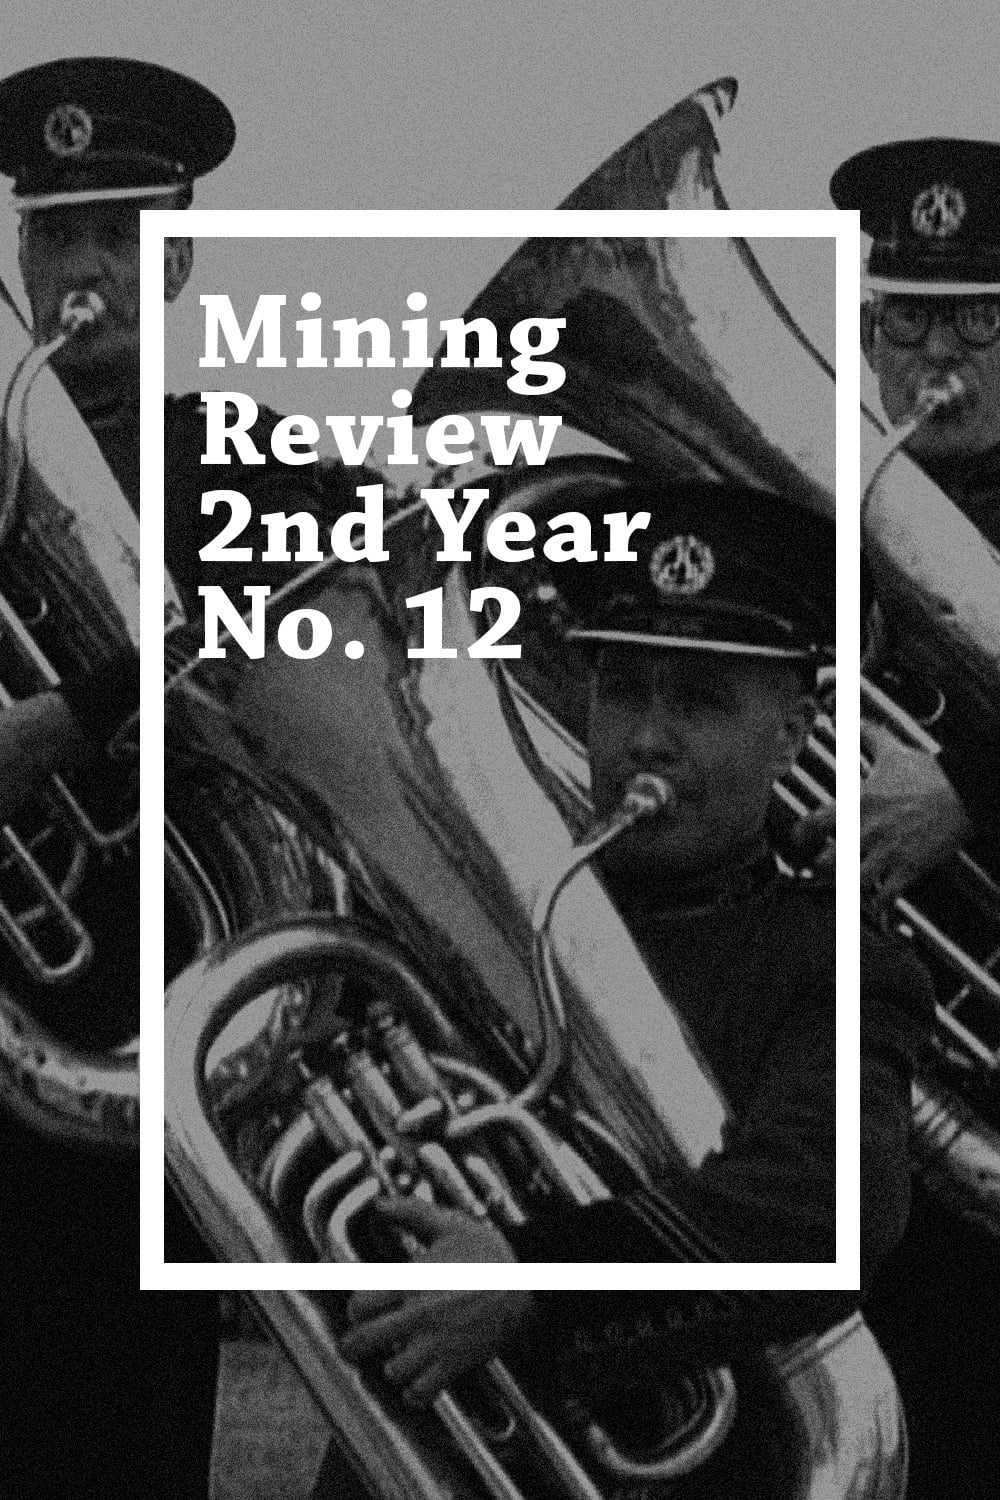 Mining Review 2nd Year No. 12